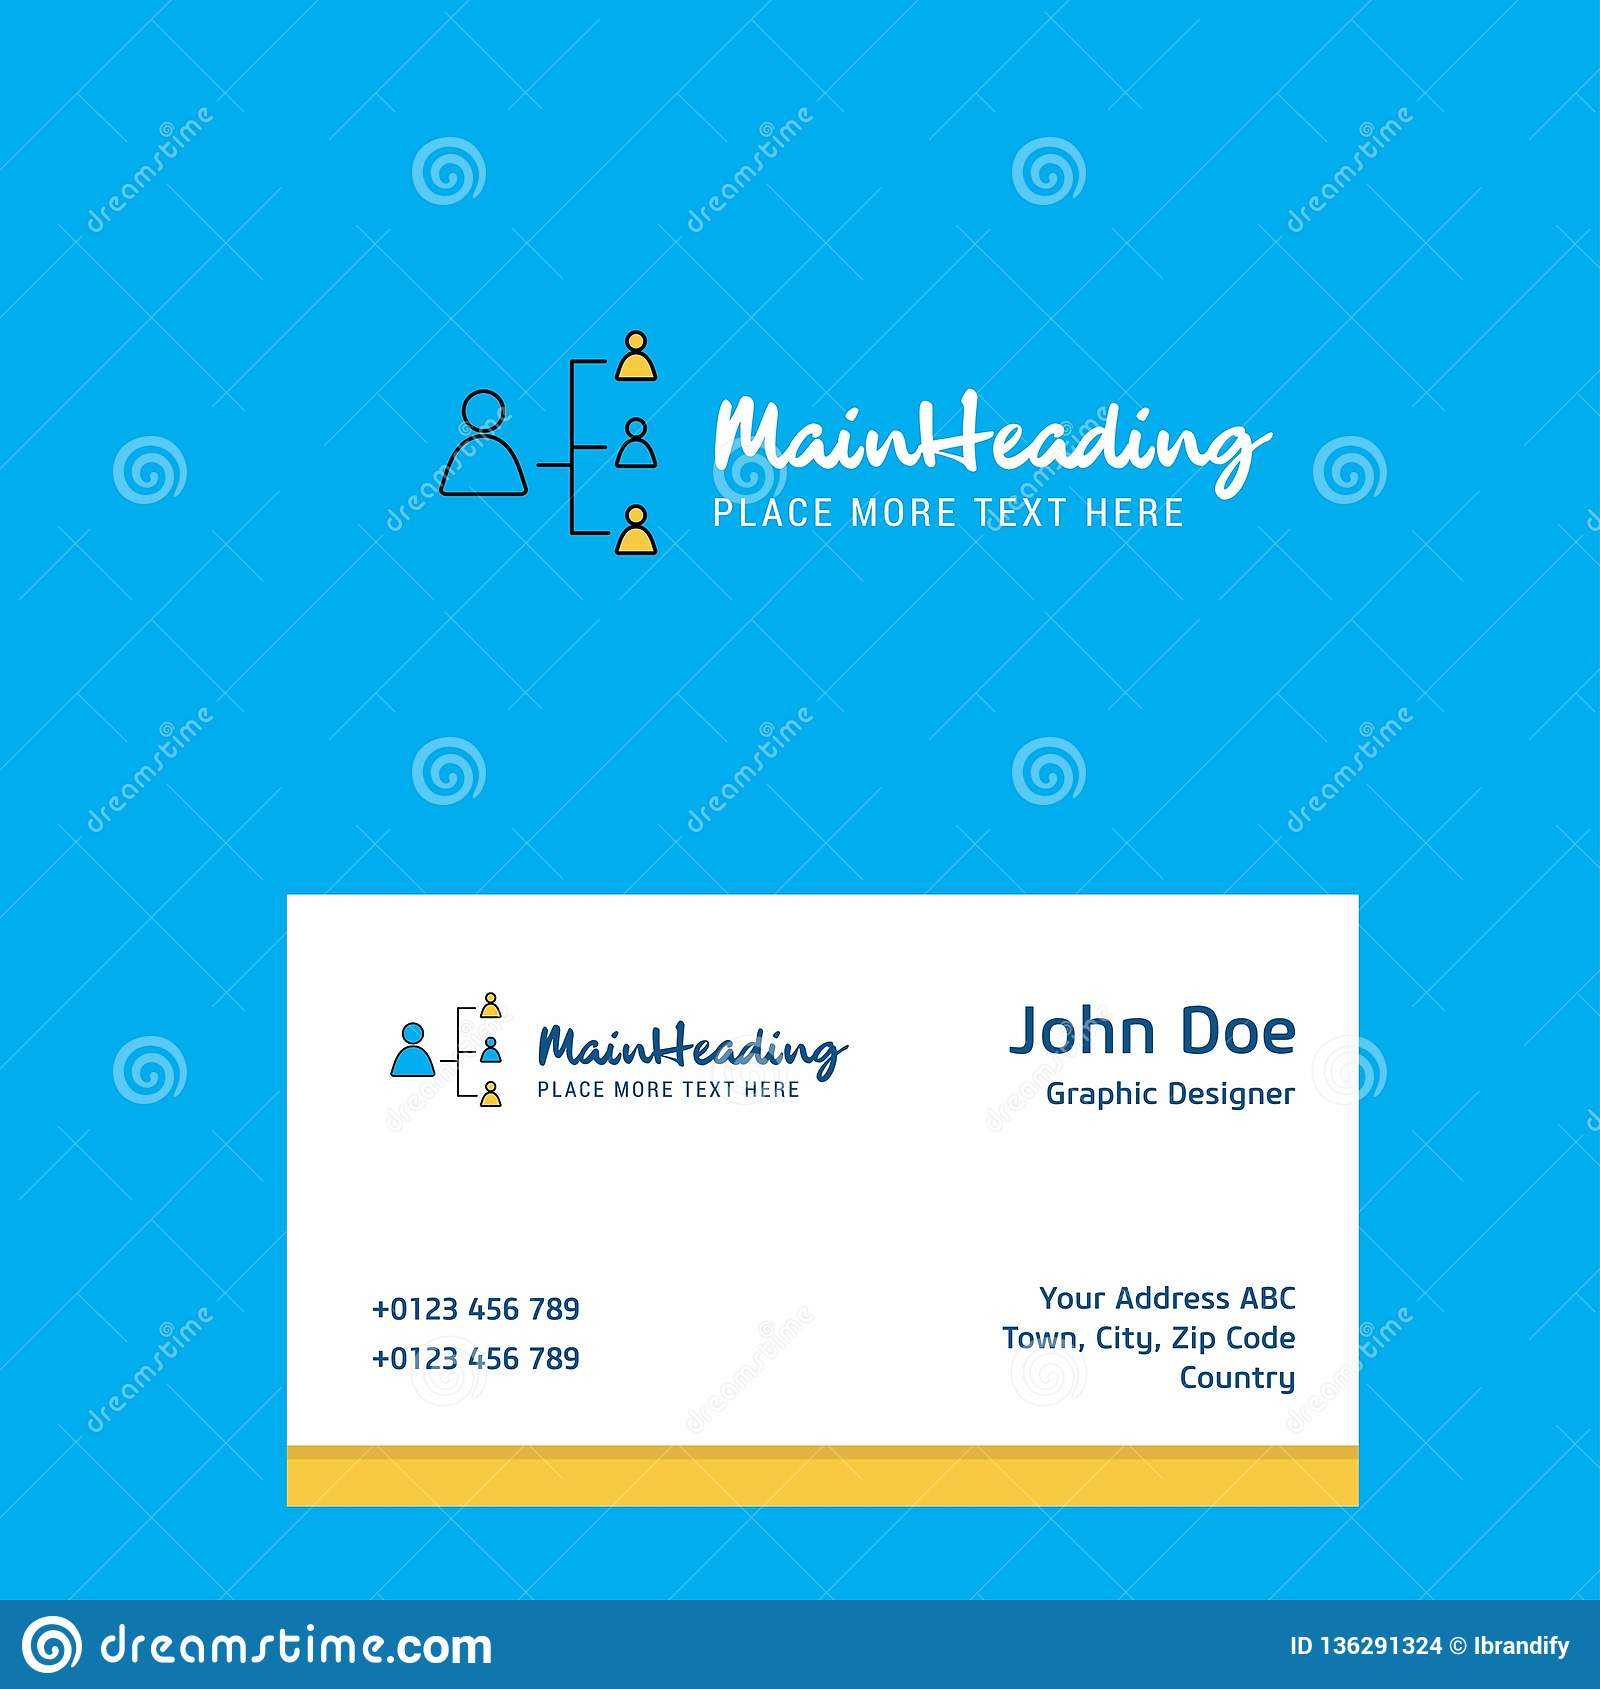 Networking Logo Design With Business Card Template. Elegant Regarding Networking Card Template